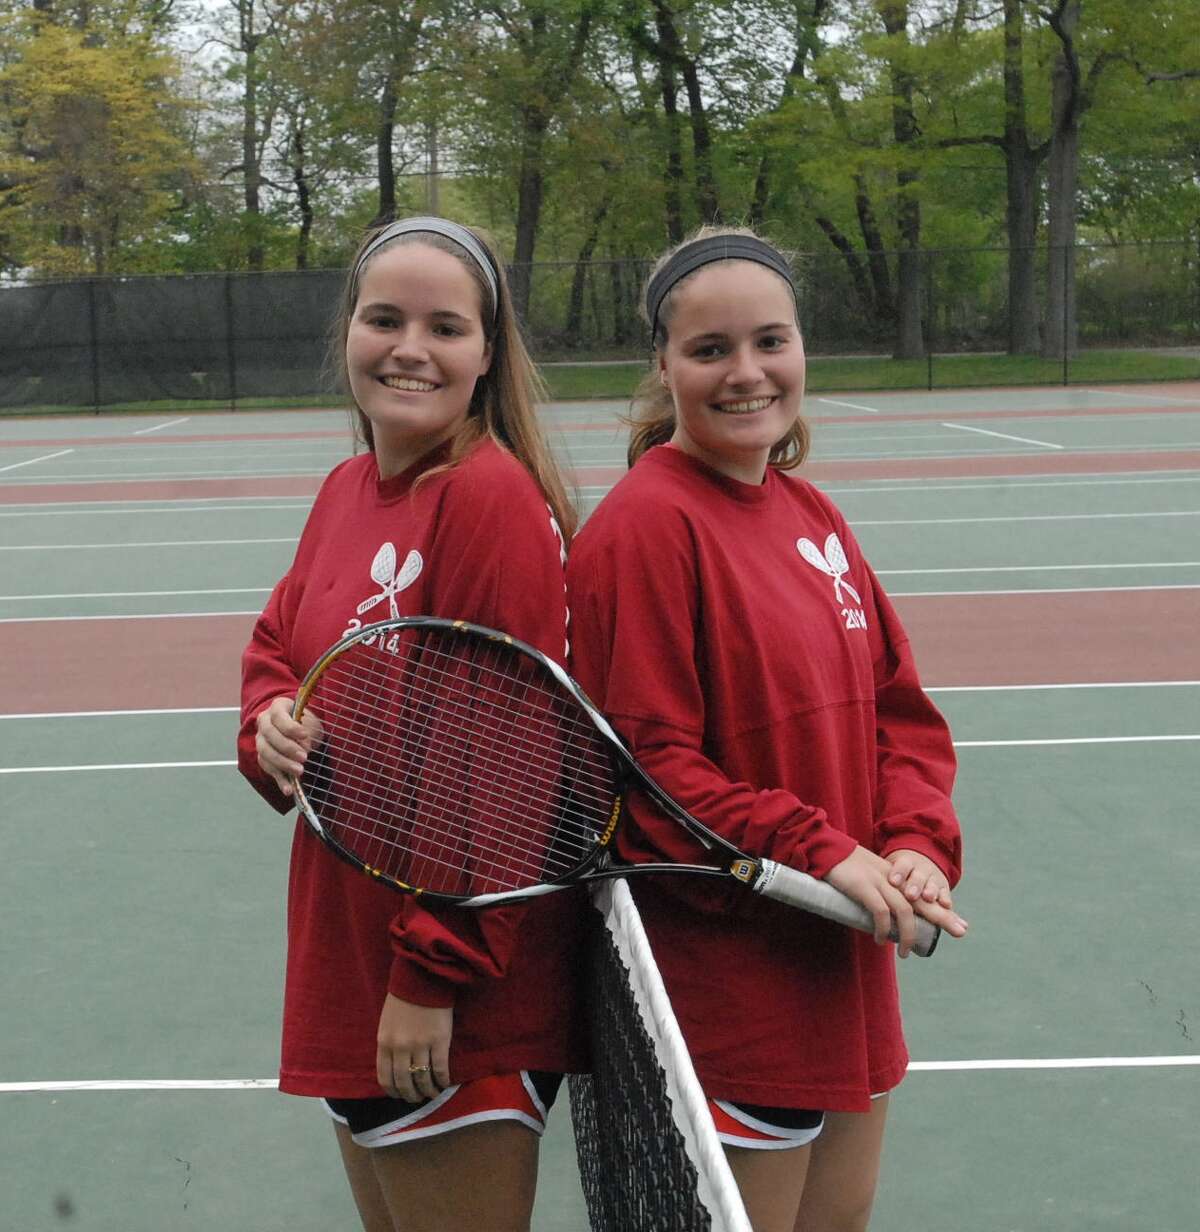 Fairfield Warde seniors and sisters, Erin and Megan Hines. Photo by Mary Albl